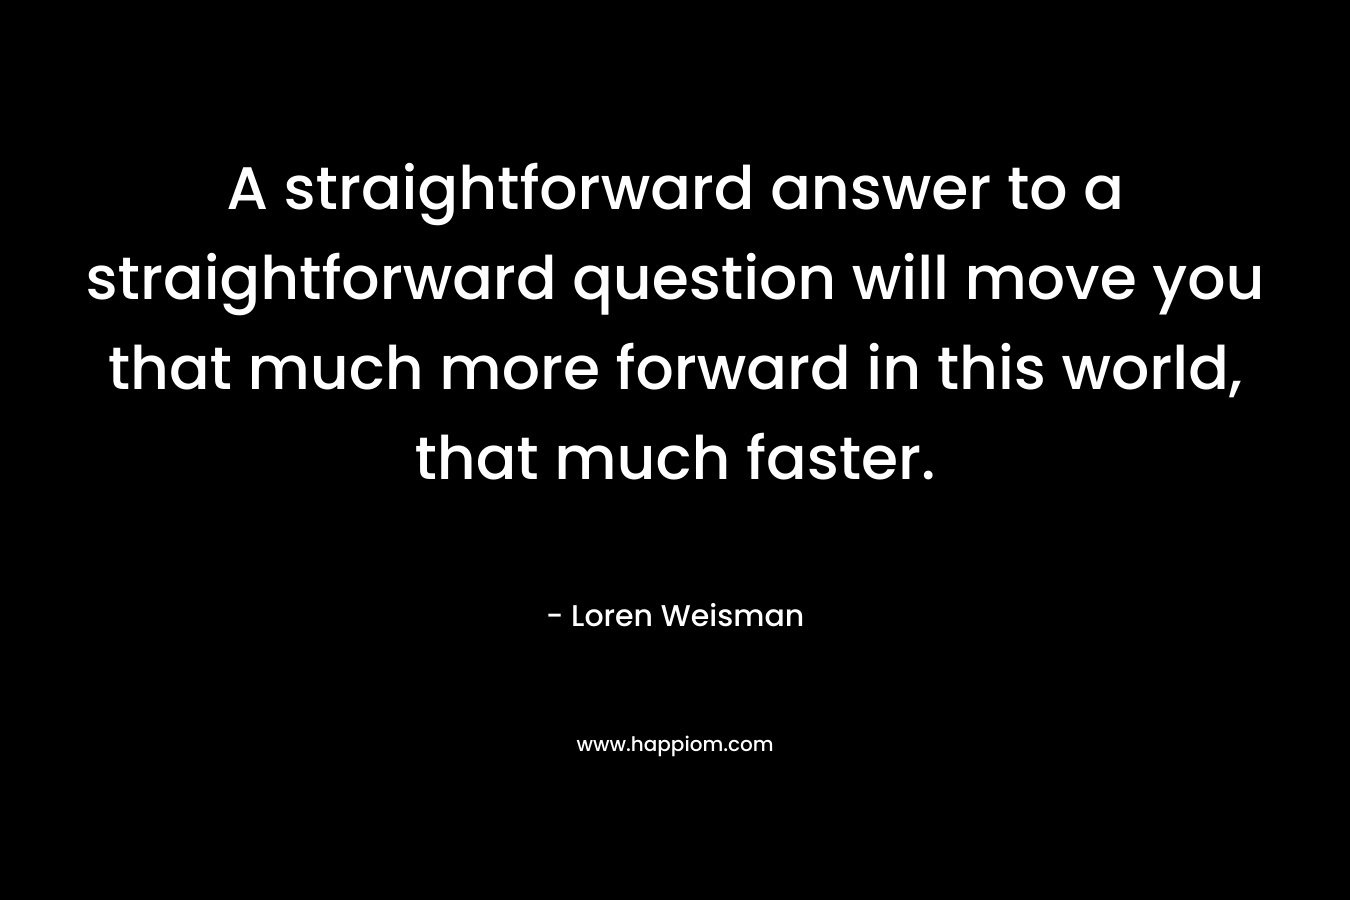 A straightforward answer to a straightforward question will move you that much more forward in this world, that much faster. – Loren Weisman